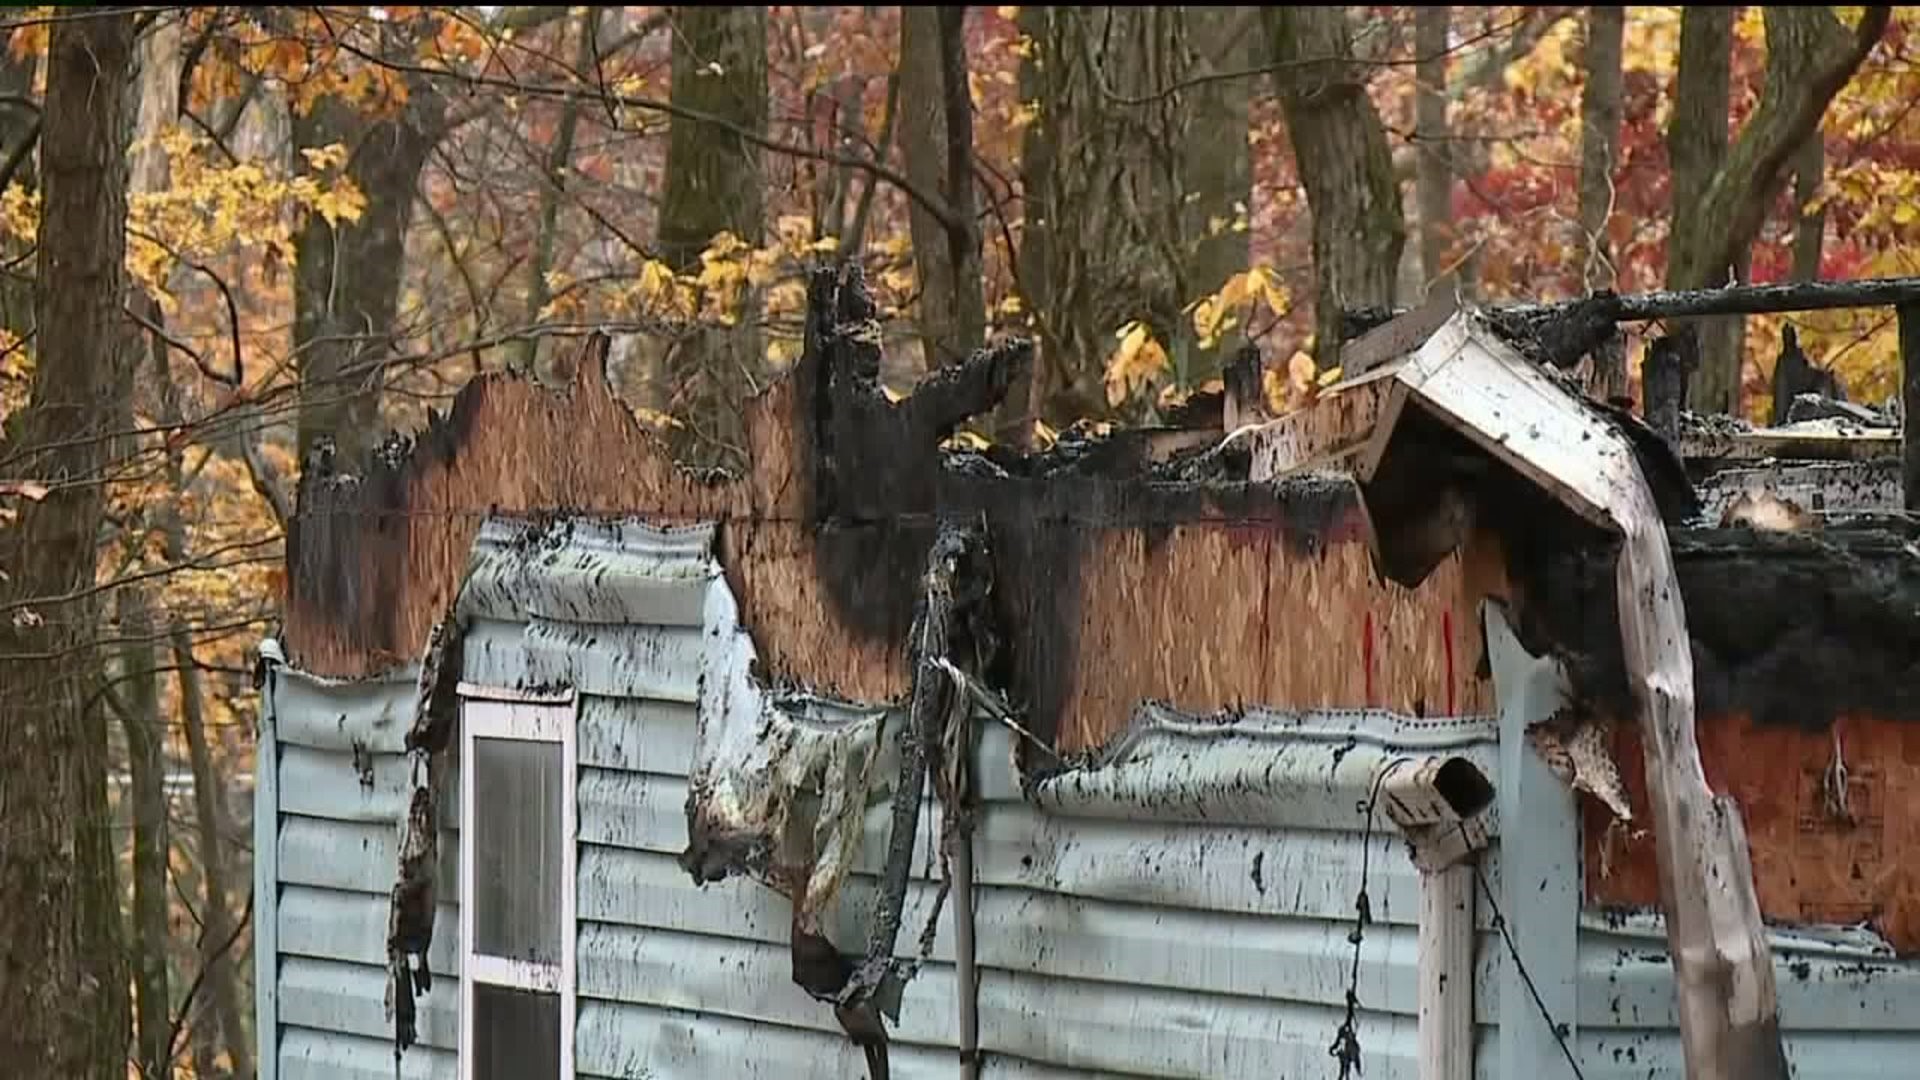 Neighbors Worried After Third Case of Arson in Monroe County